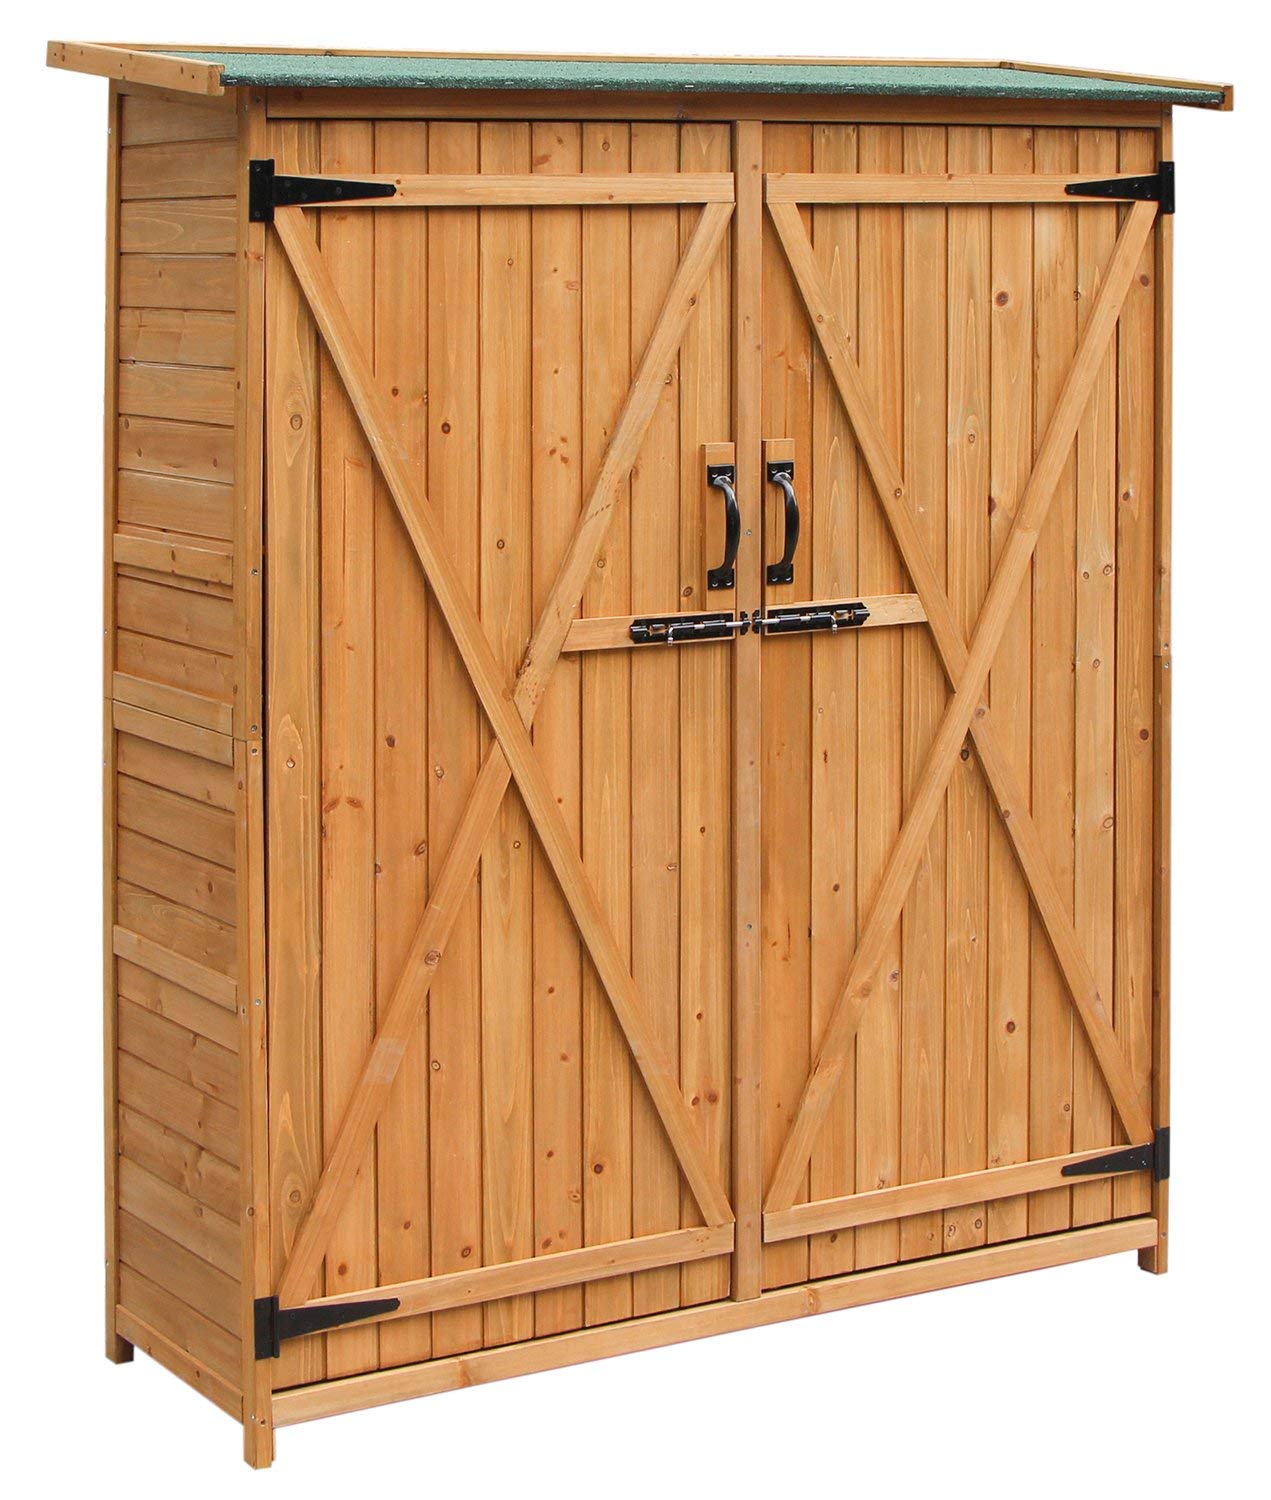 wood storage sheds amazon.com : merax wooden outdoor garden shed with fir wood medium storage KSIDQMB